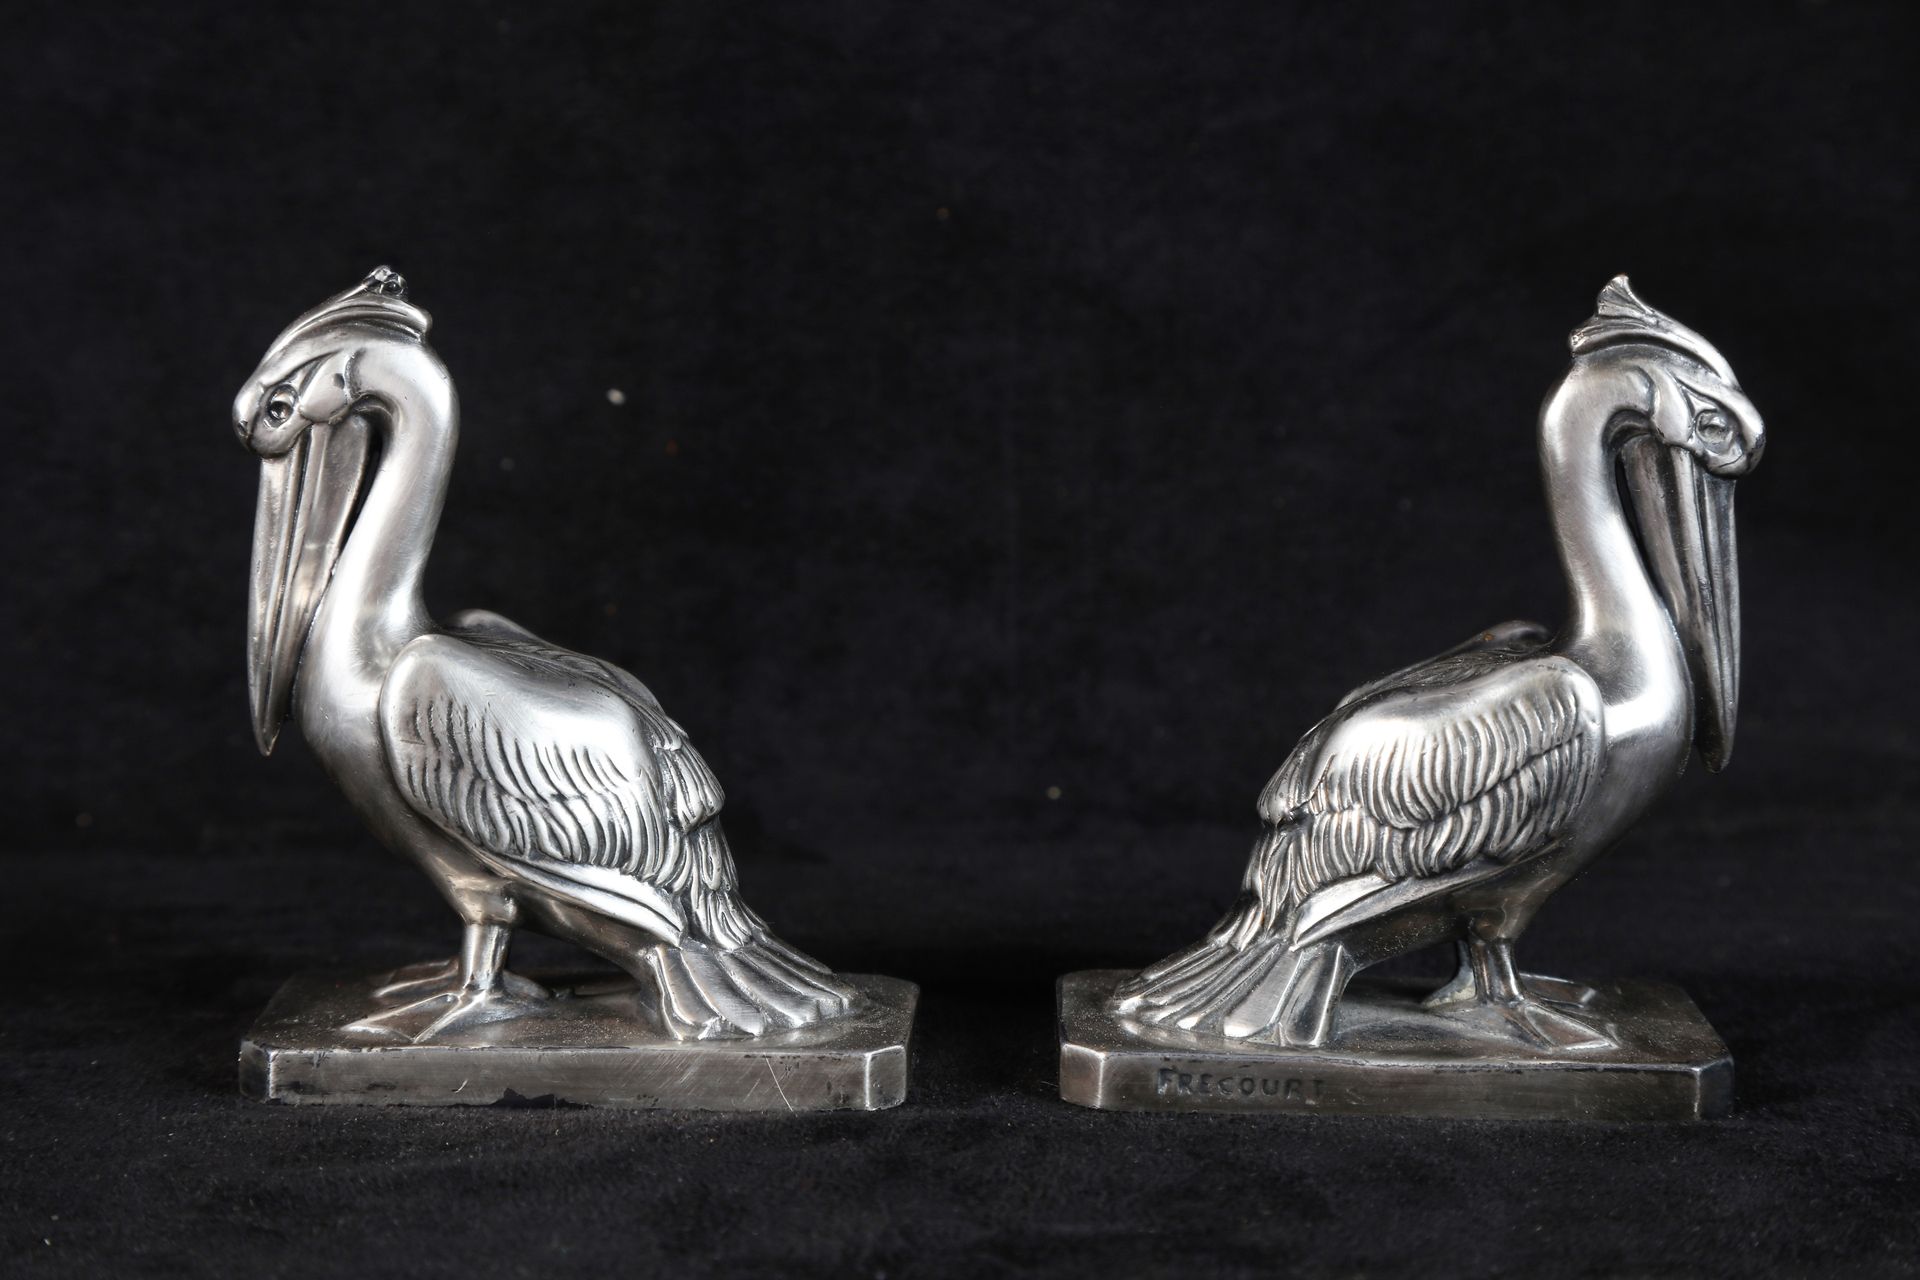 Null FRECOURT, pair of pelicans, silver plated, 11X10X5